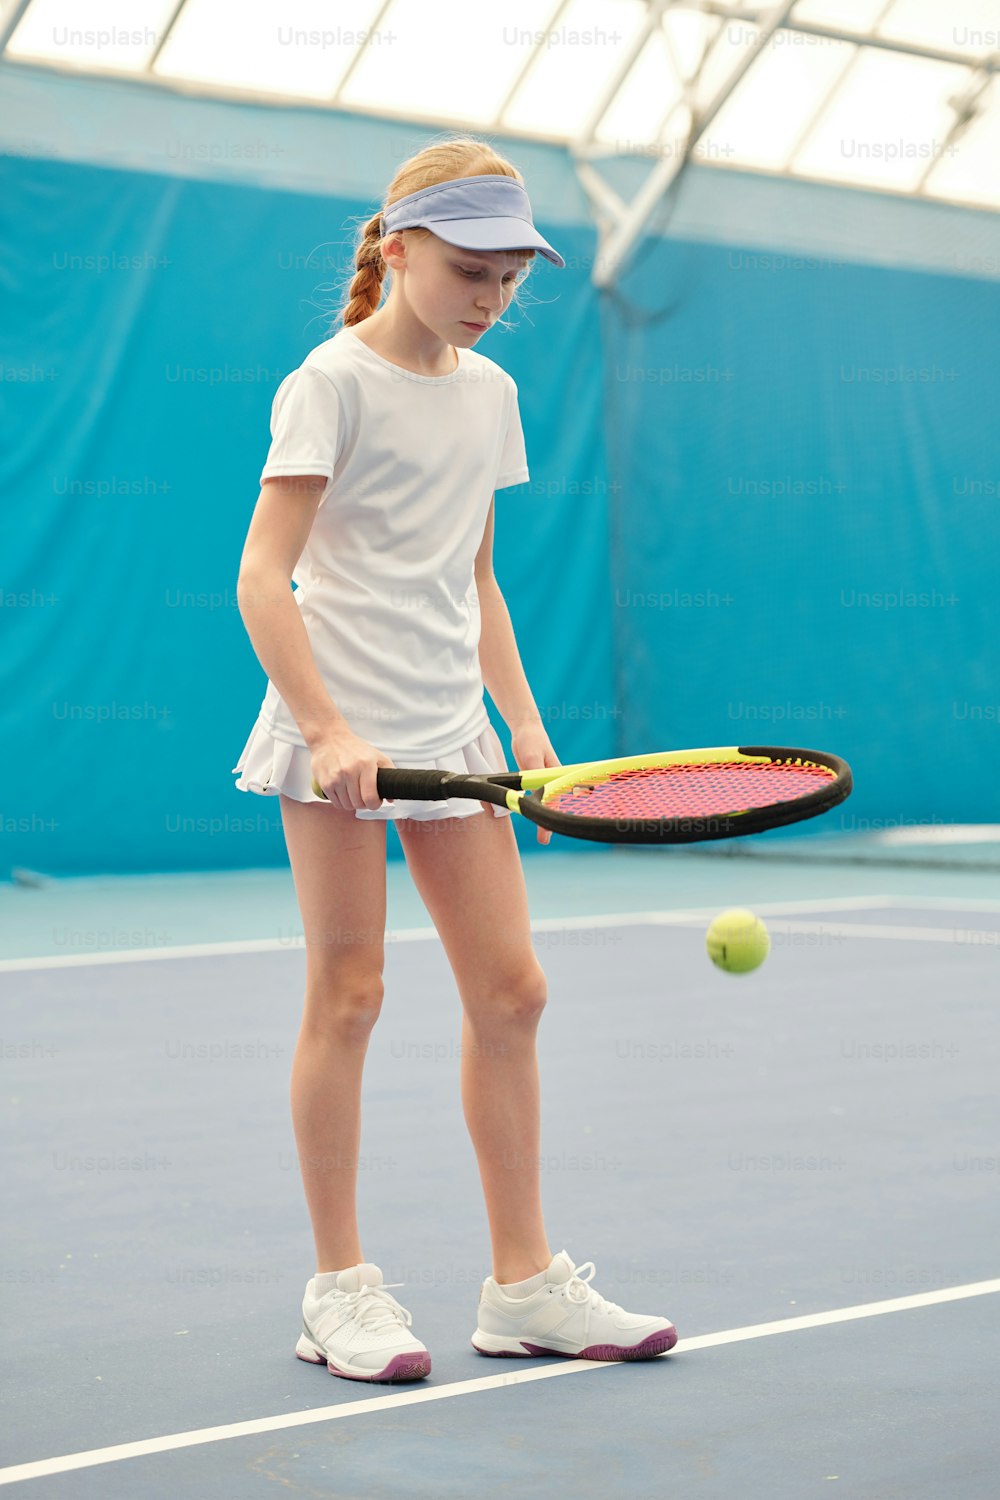 Youthful blond girl in white activewear holding tennis racket while standing on stadium and pushing ball during training in front of camera